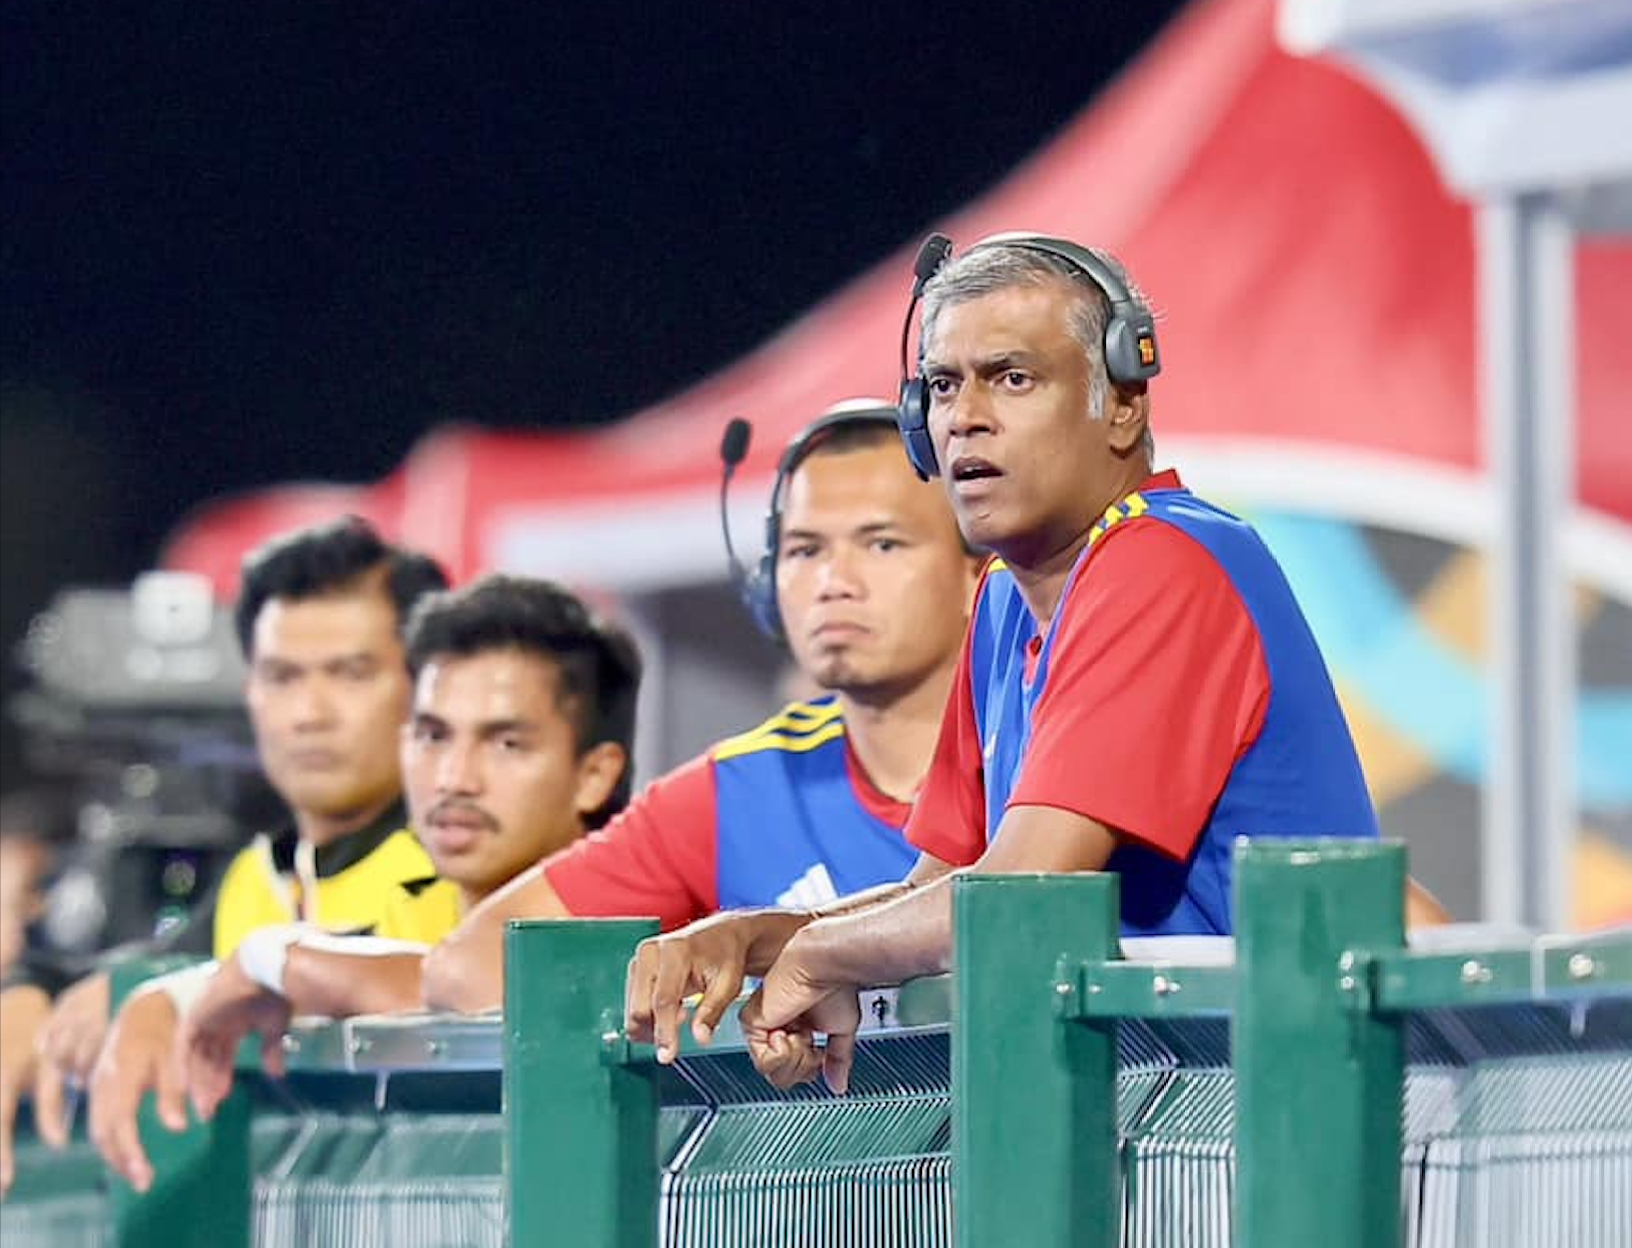 MHC hunting for new national team head coach after Speedy Tigers' demise